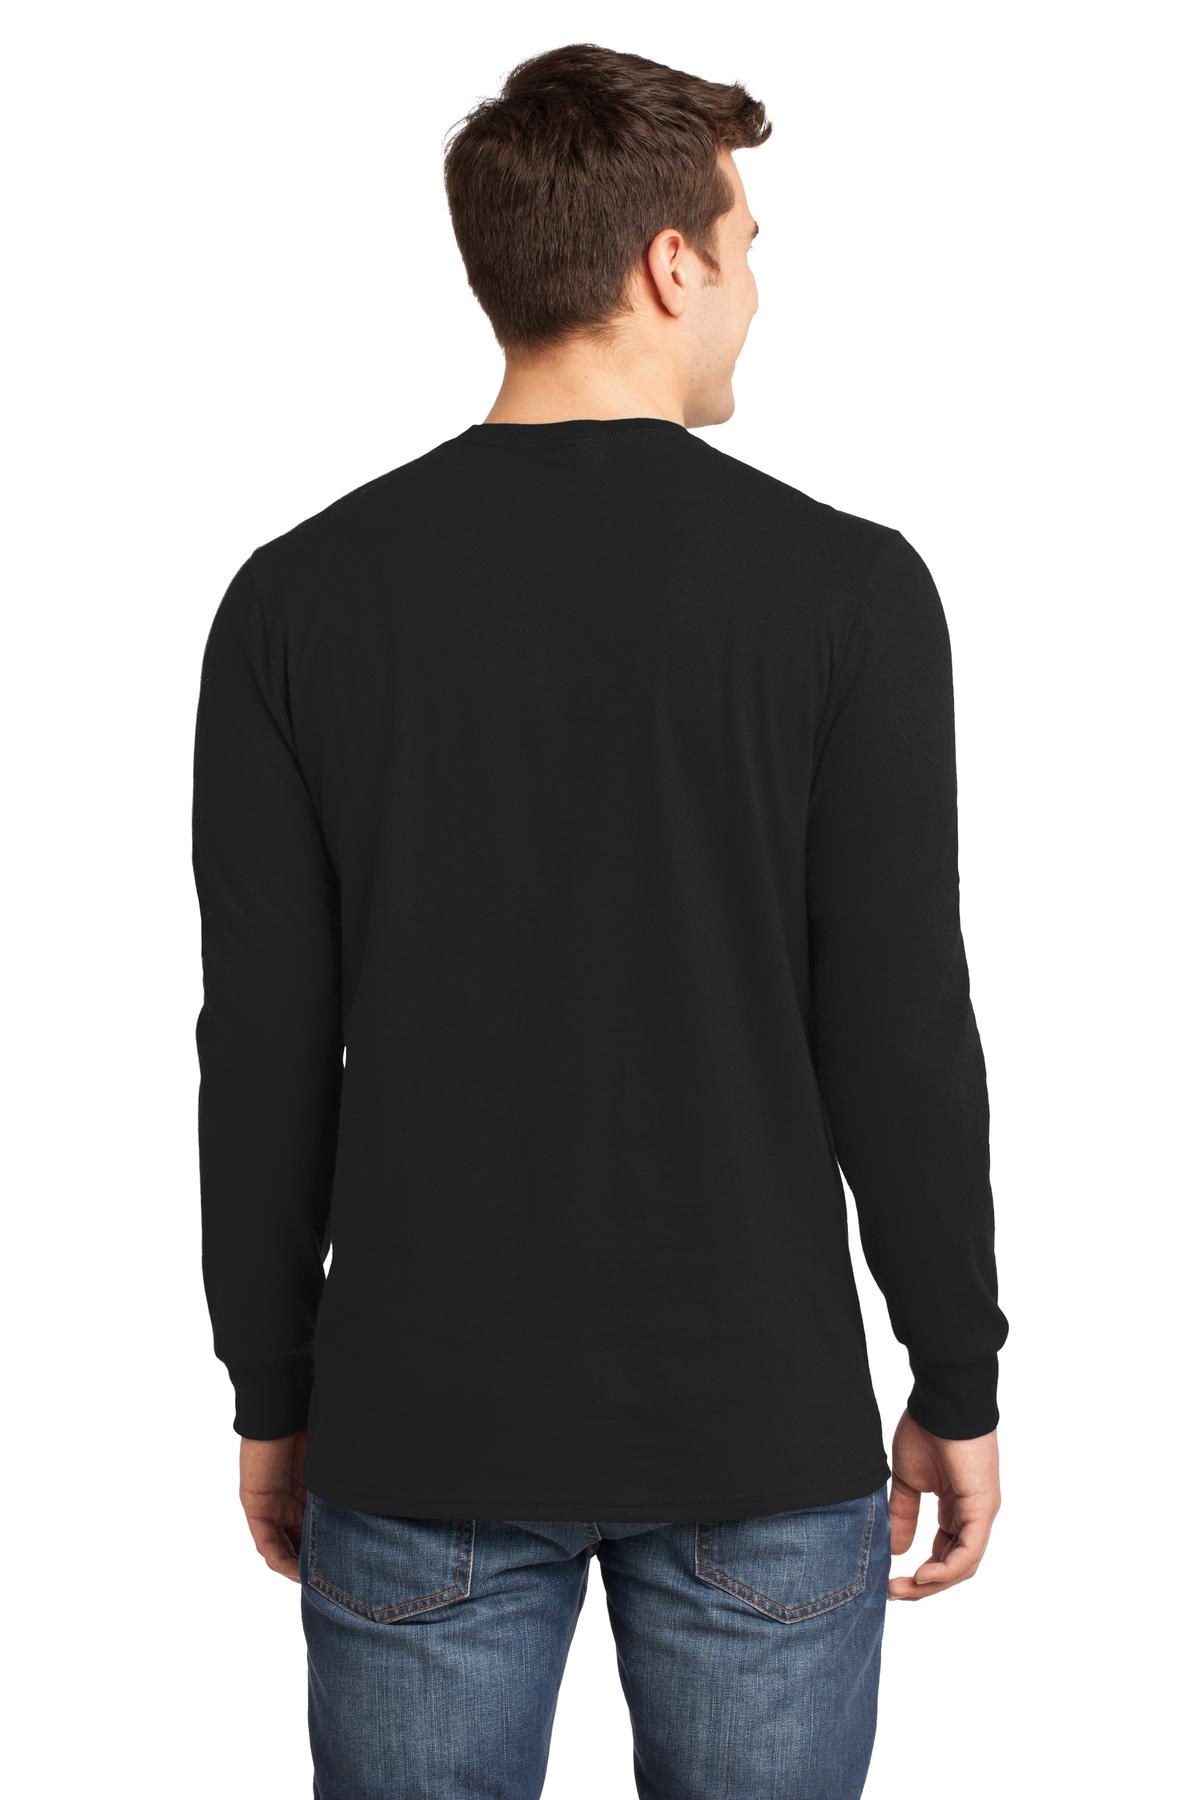 District ® - Young Mens The Concert Tee ® Long Sleeve. DT5200 - Custom ...